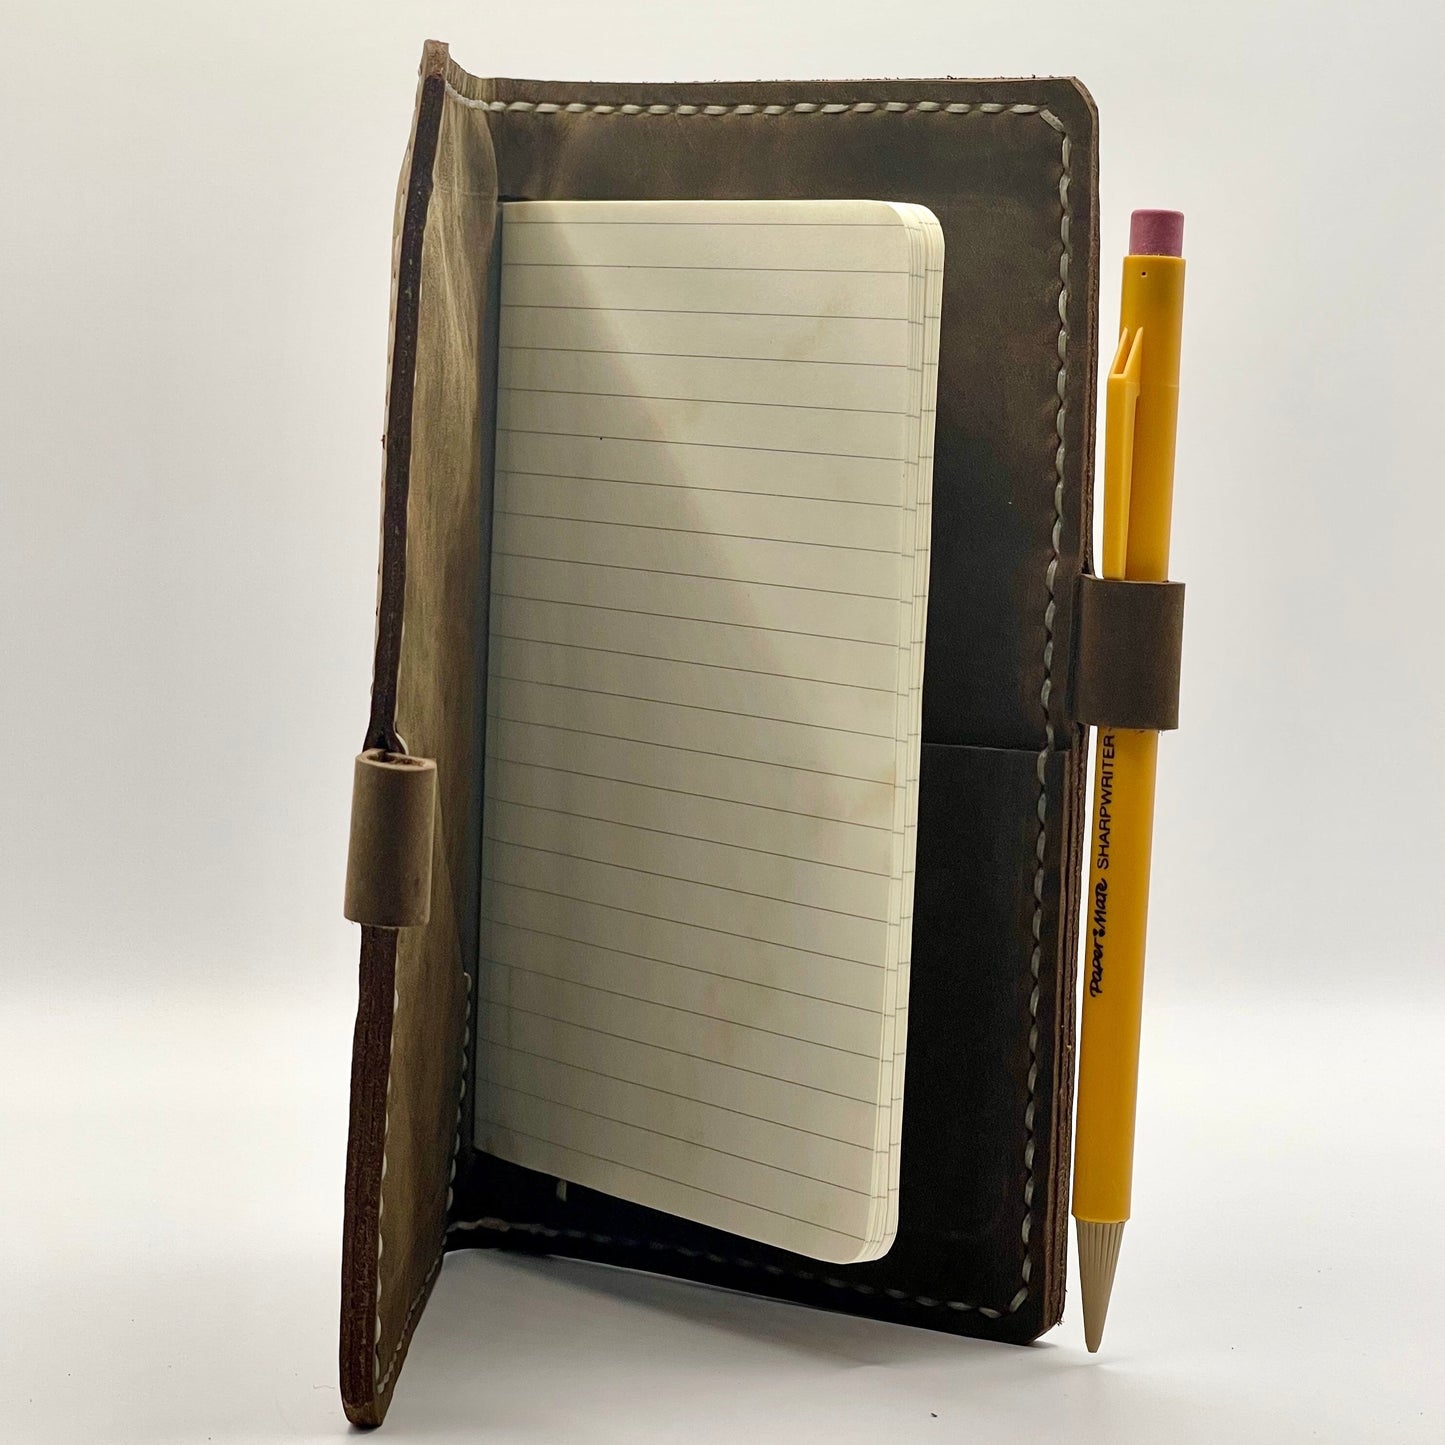 Travel Notebook Cover